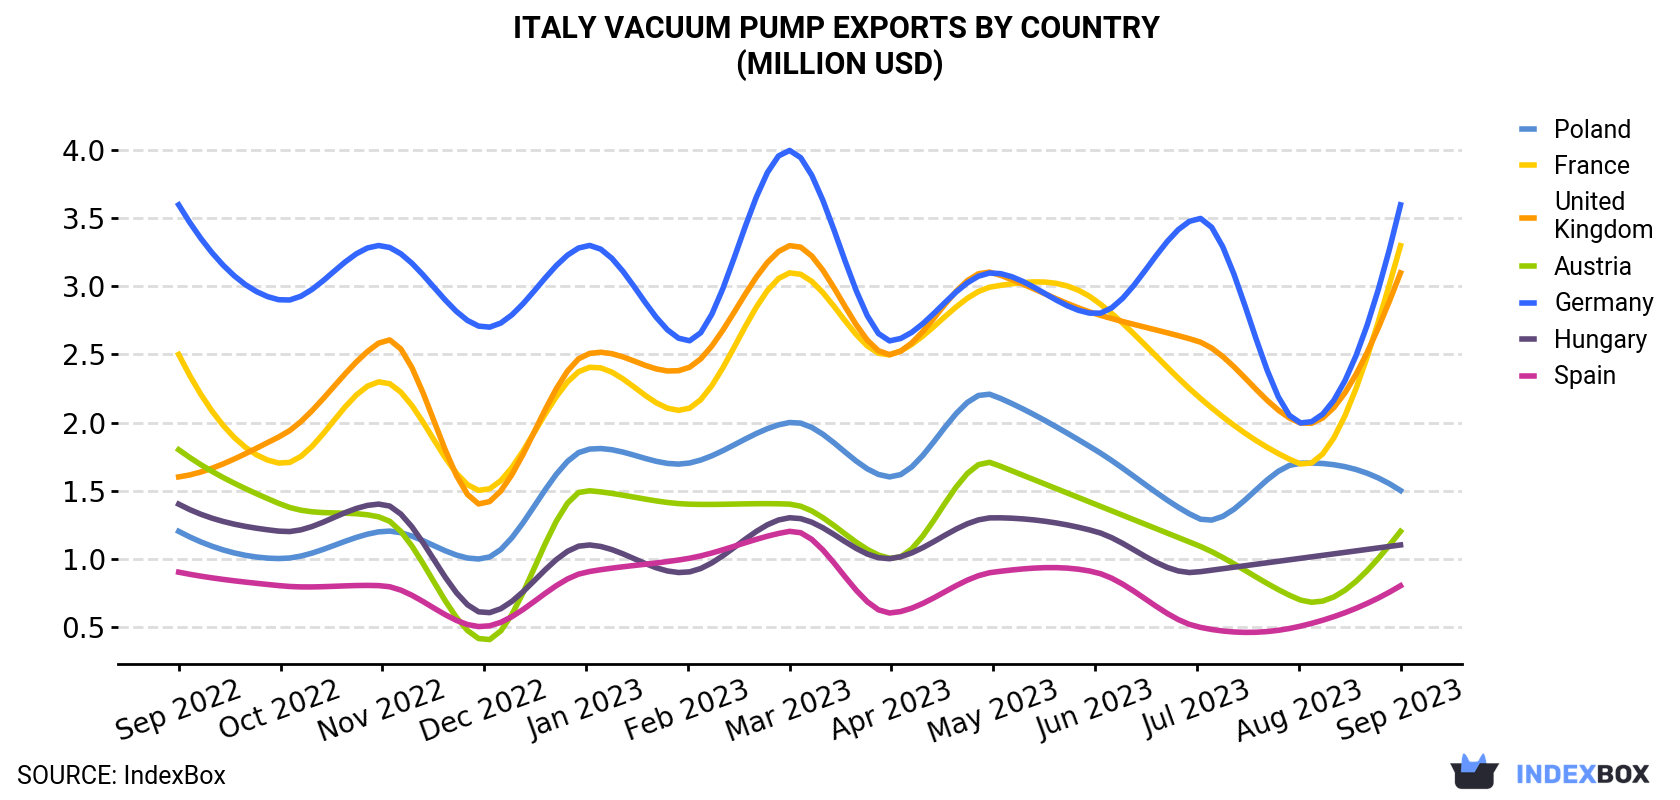 Italy Vacuum Pump Exports By Country (Million USD)